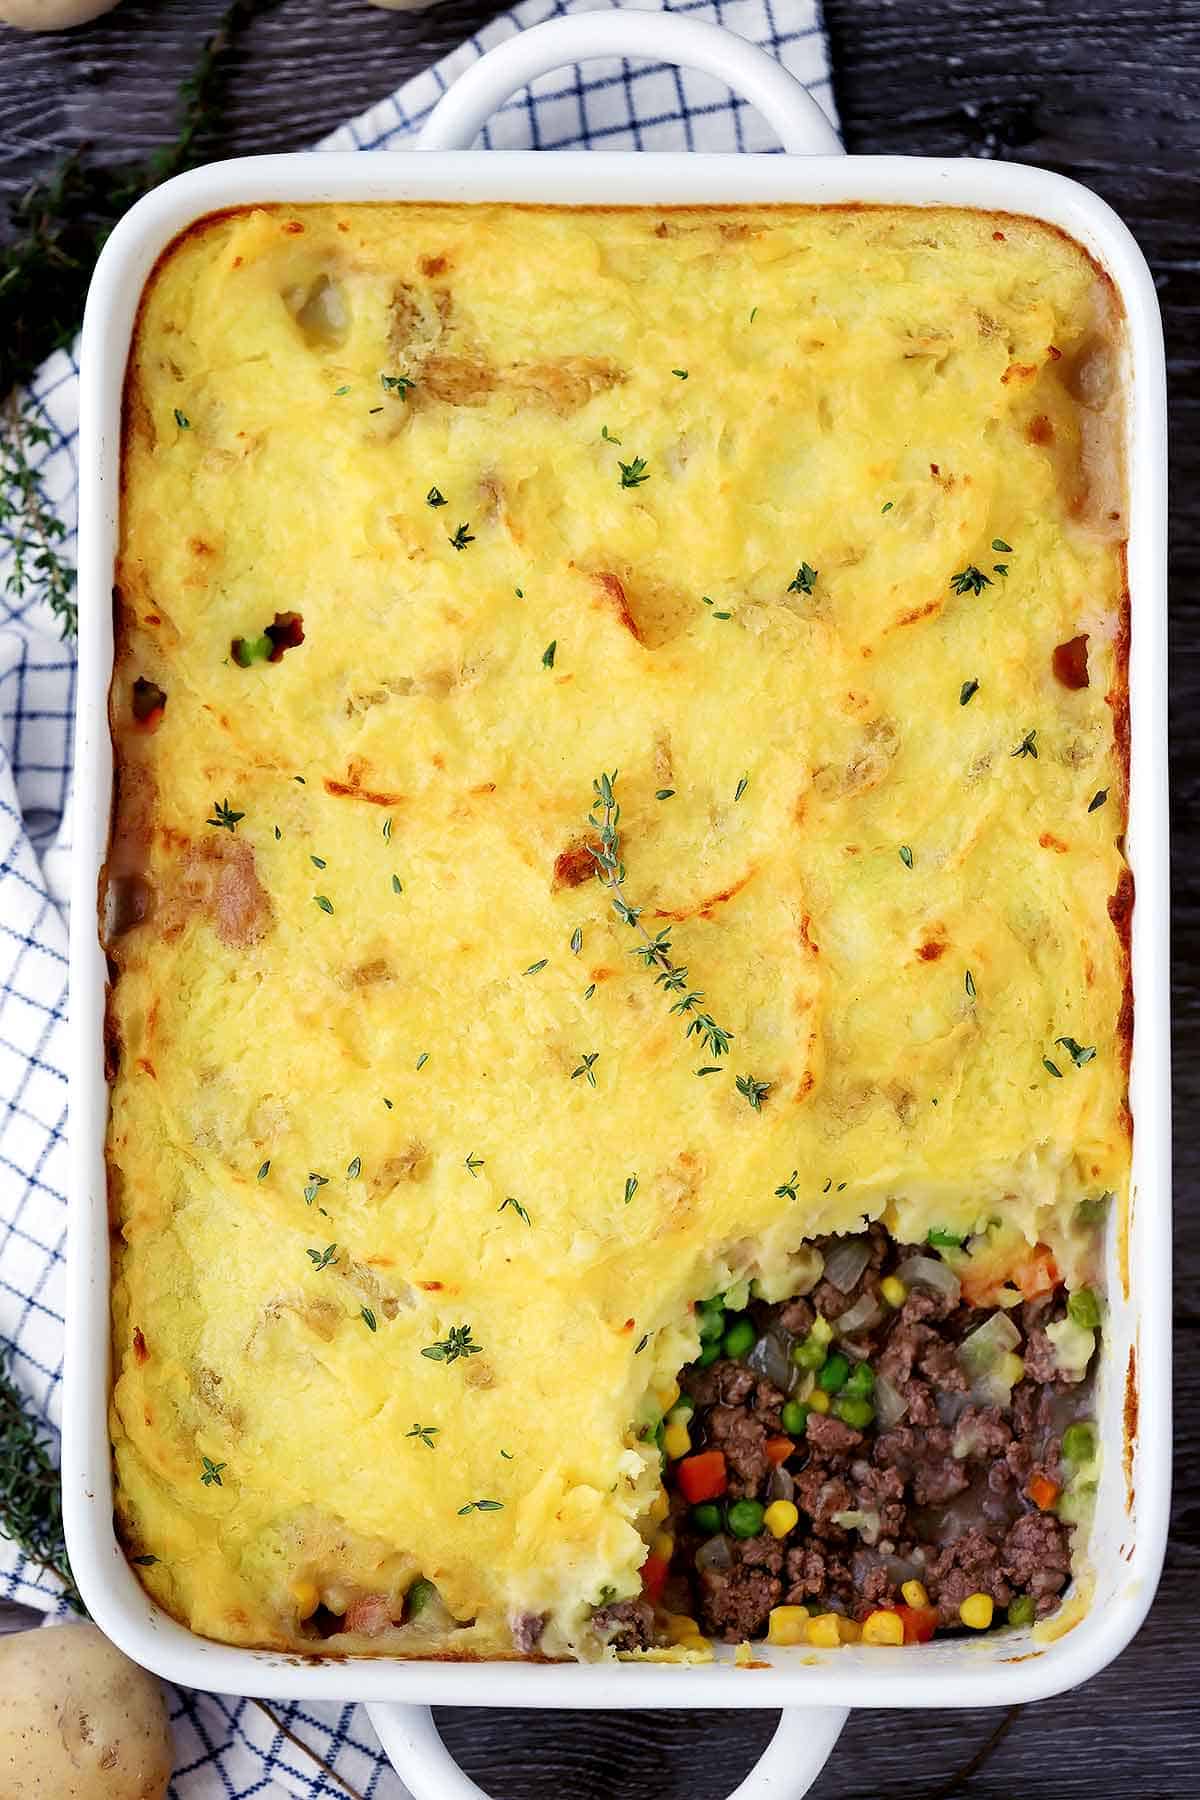 A large casserole dish with shepherd's pie and a sprig of thyme.